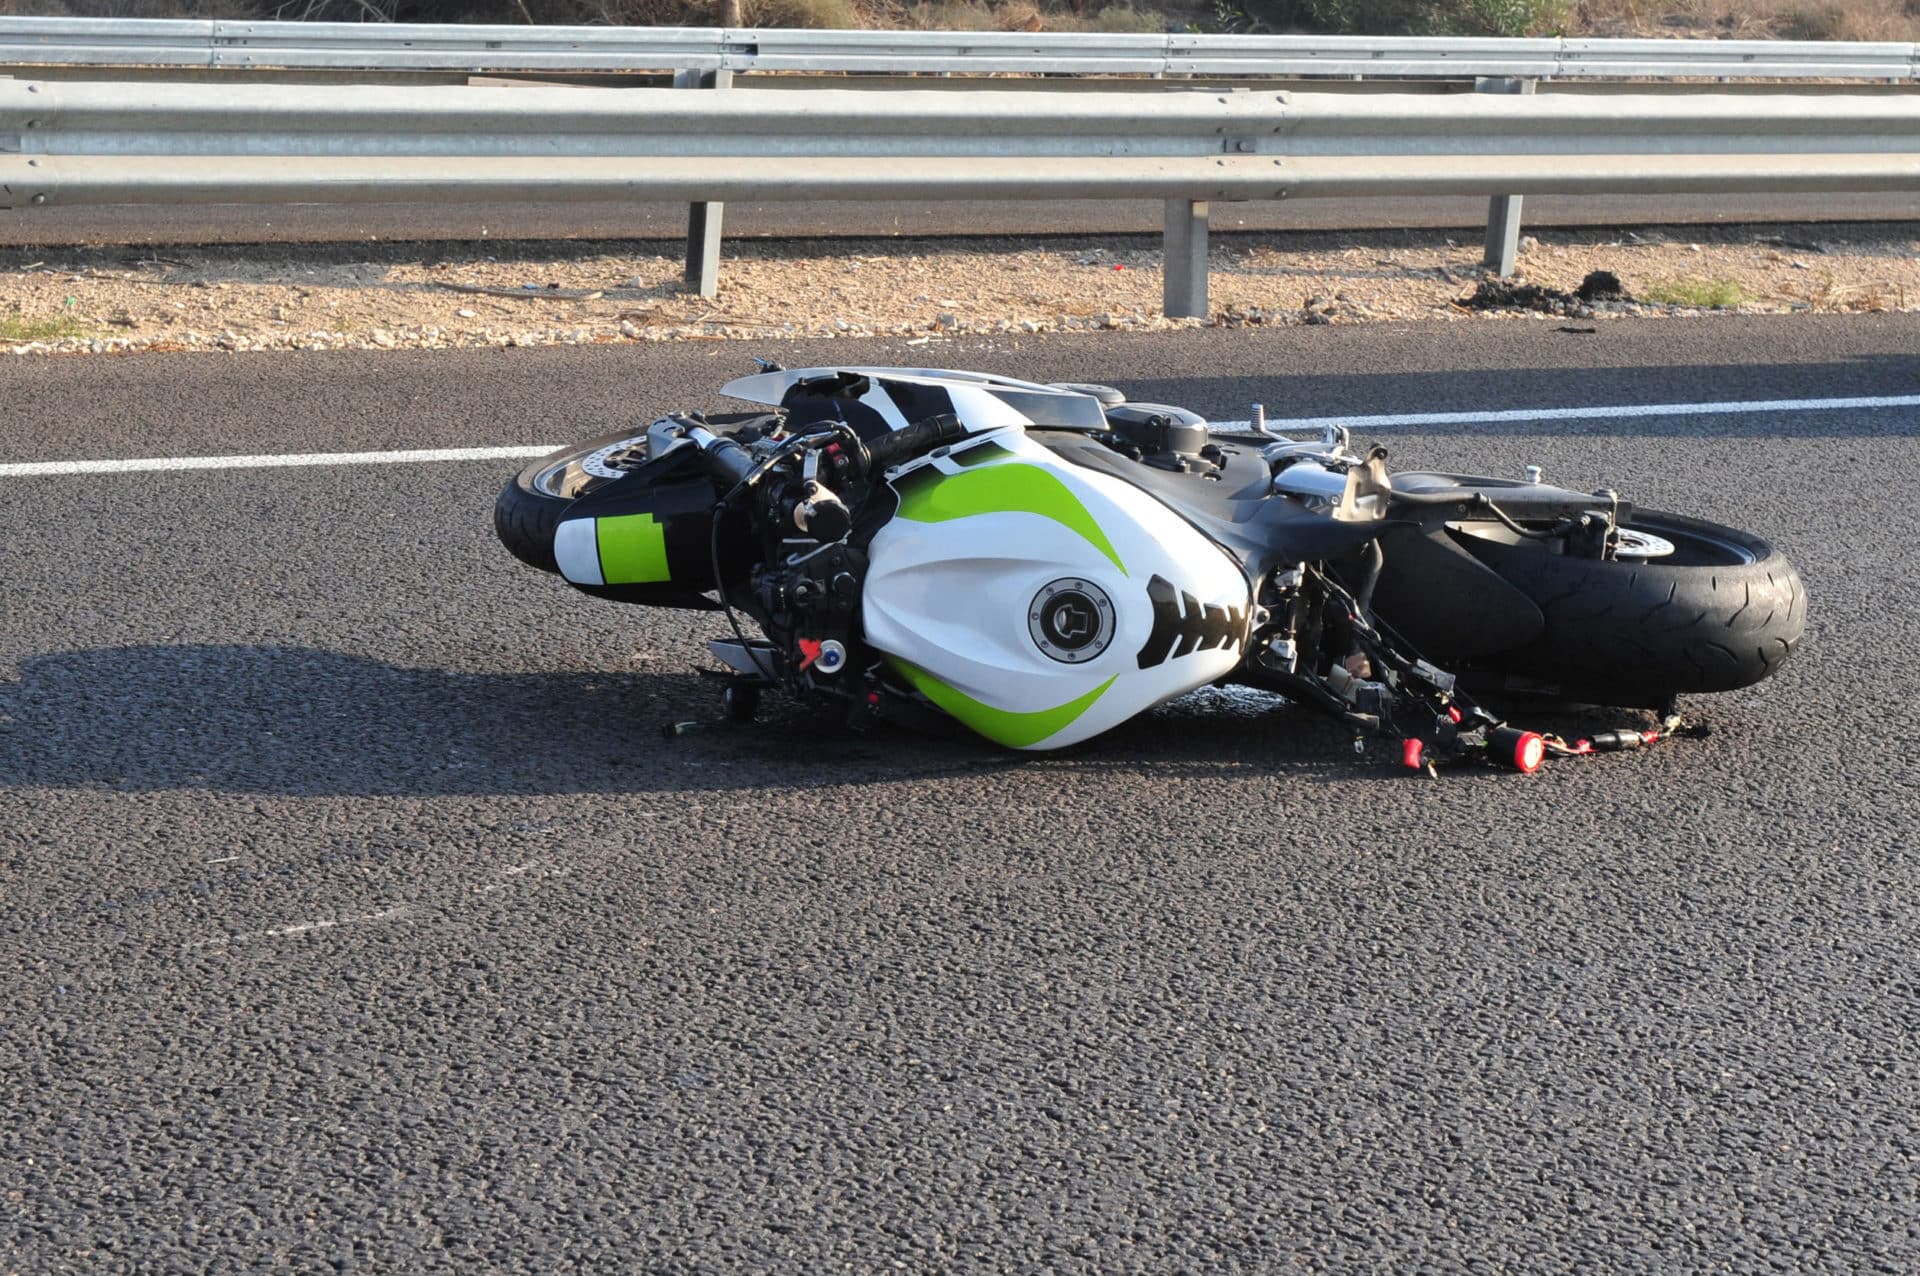 NY Motorcyclists Can't Always Avoid Accidents -- But They Can Gear Up